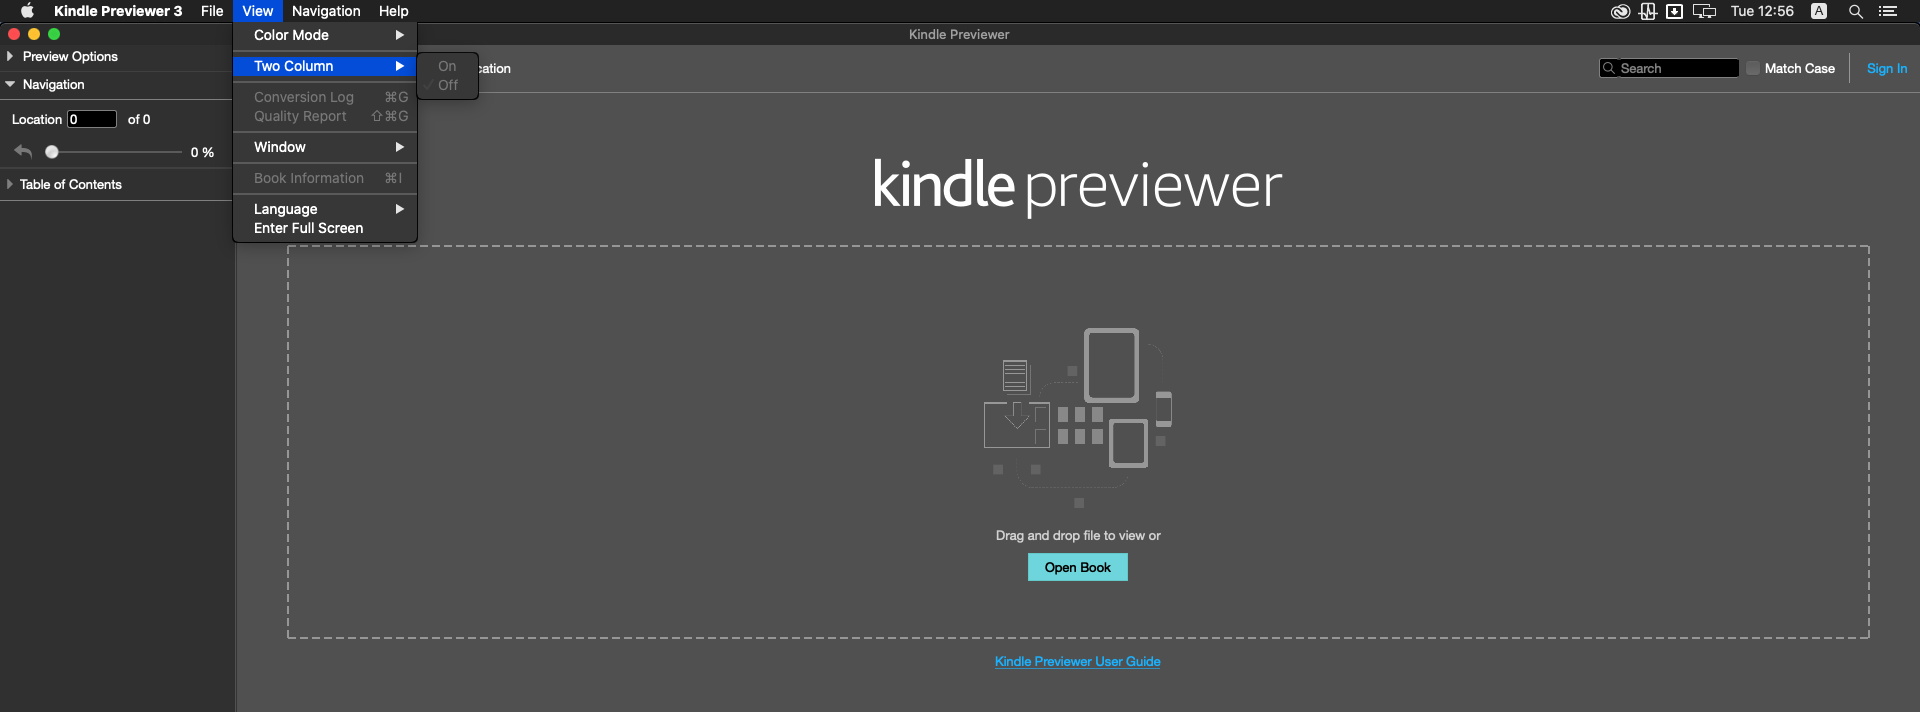 Kindle Previewer 3.5 : View tab 